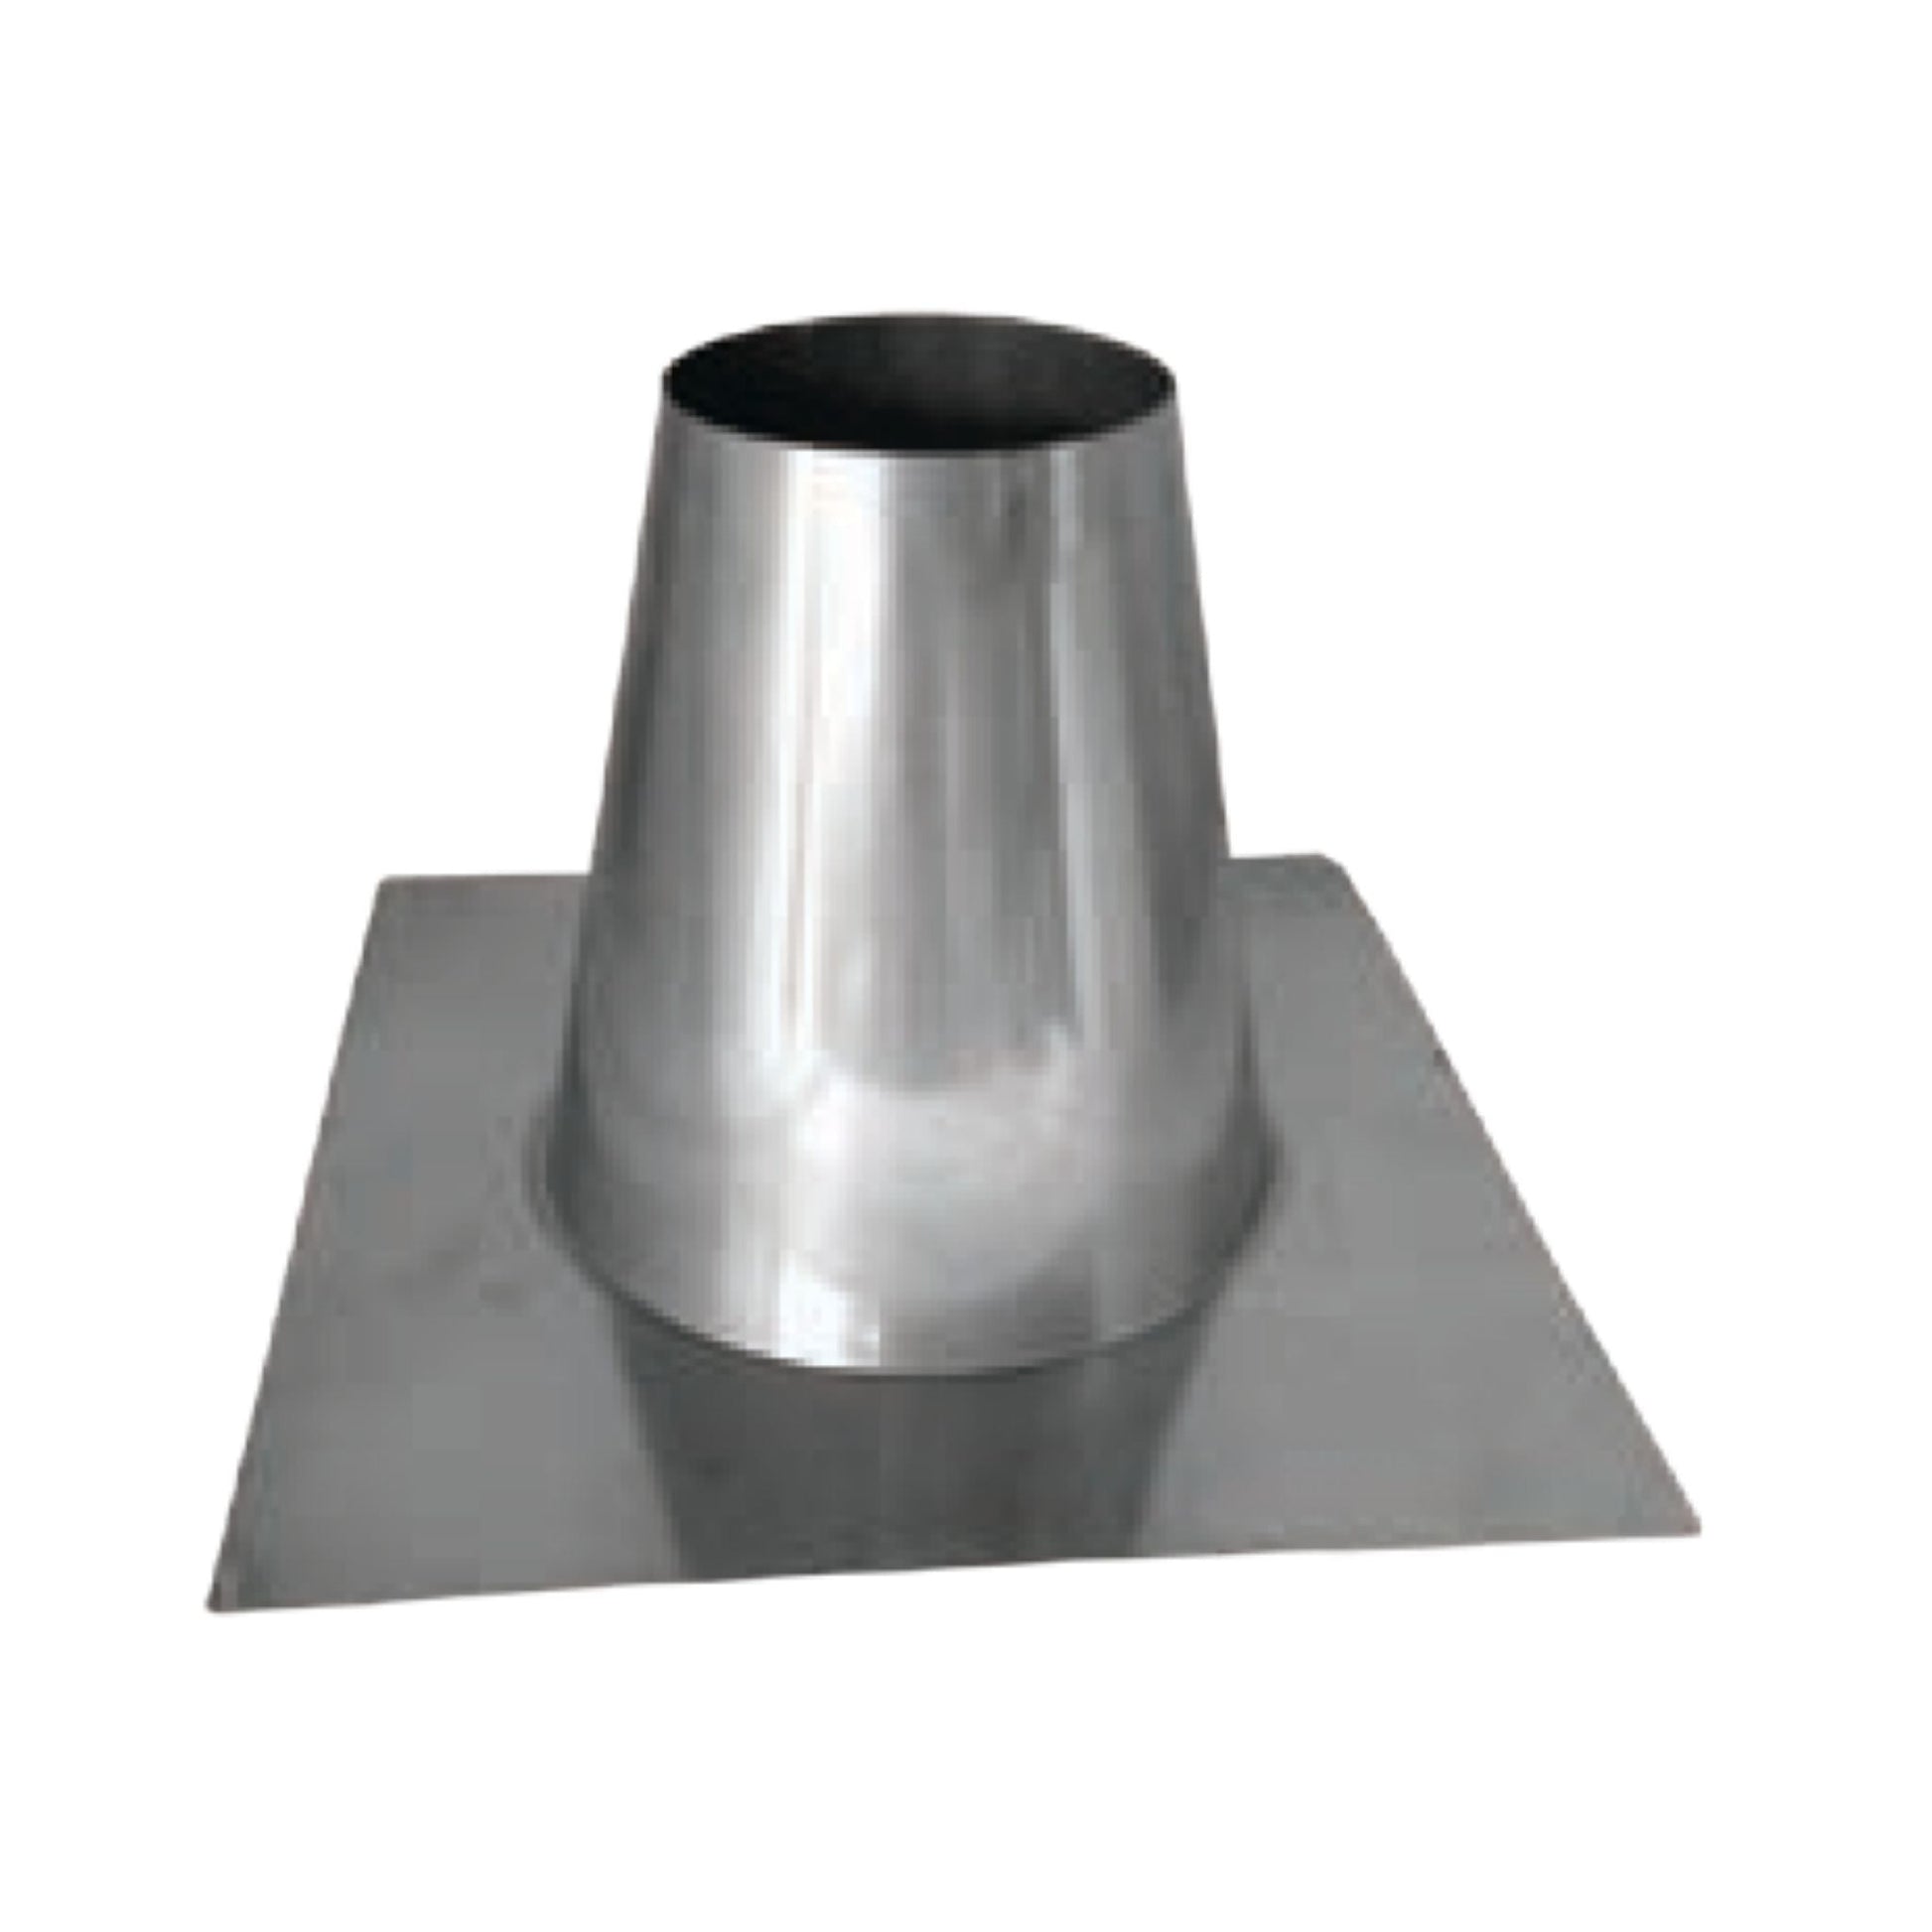 DuraVent FasNSeal 9" 29-4C Stainless Steel Tall Cone Flashing